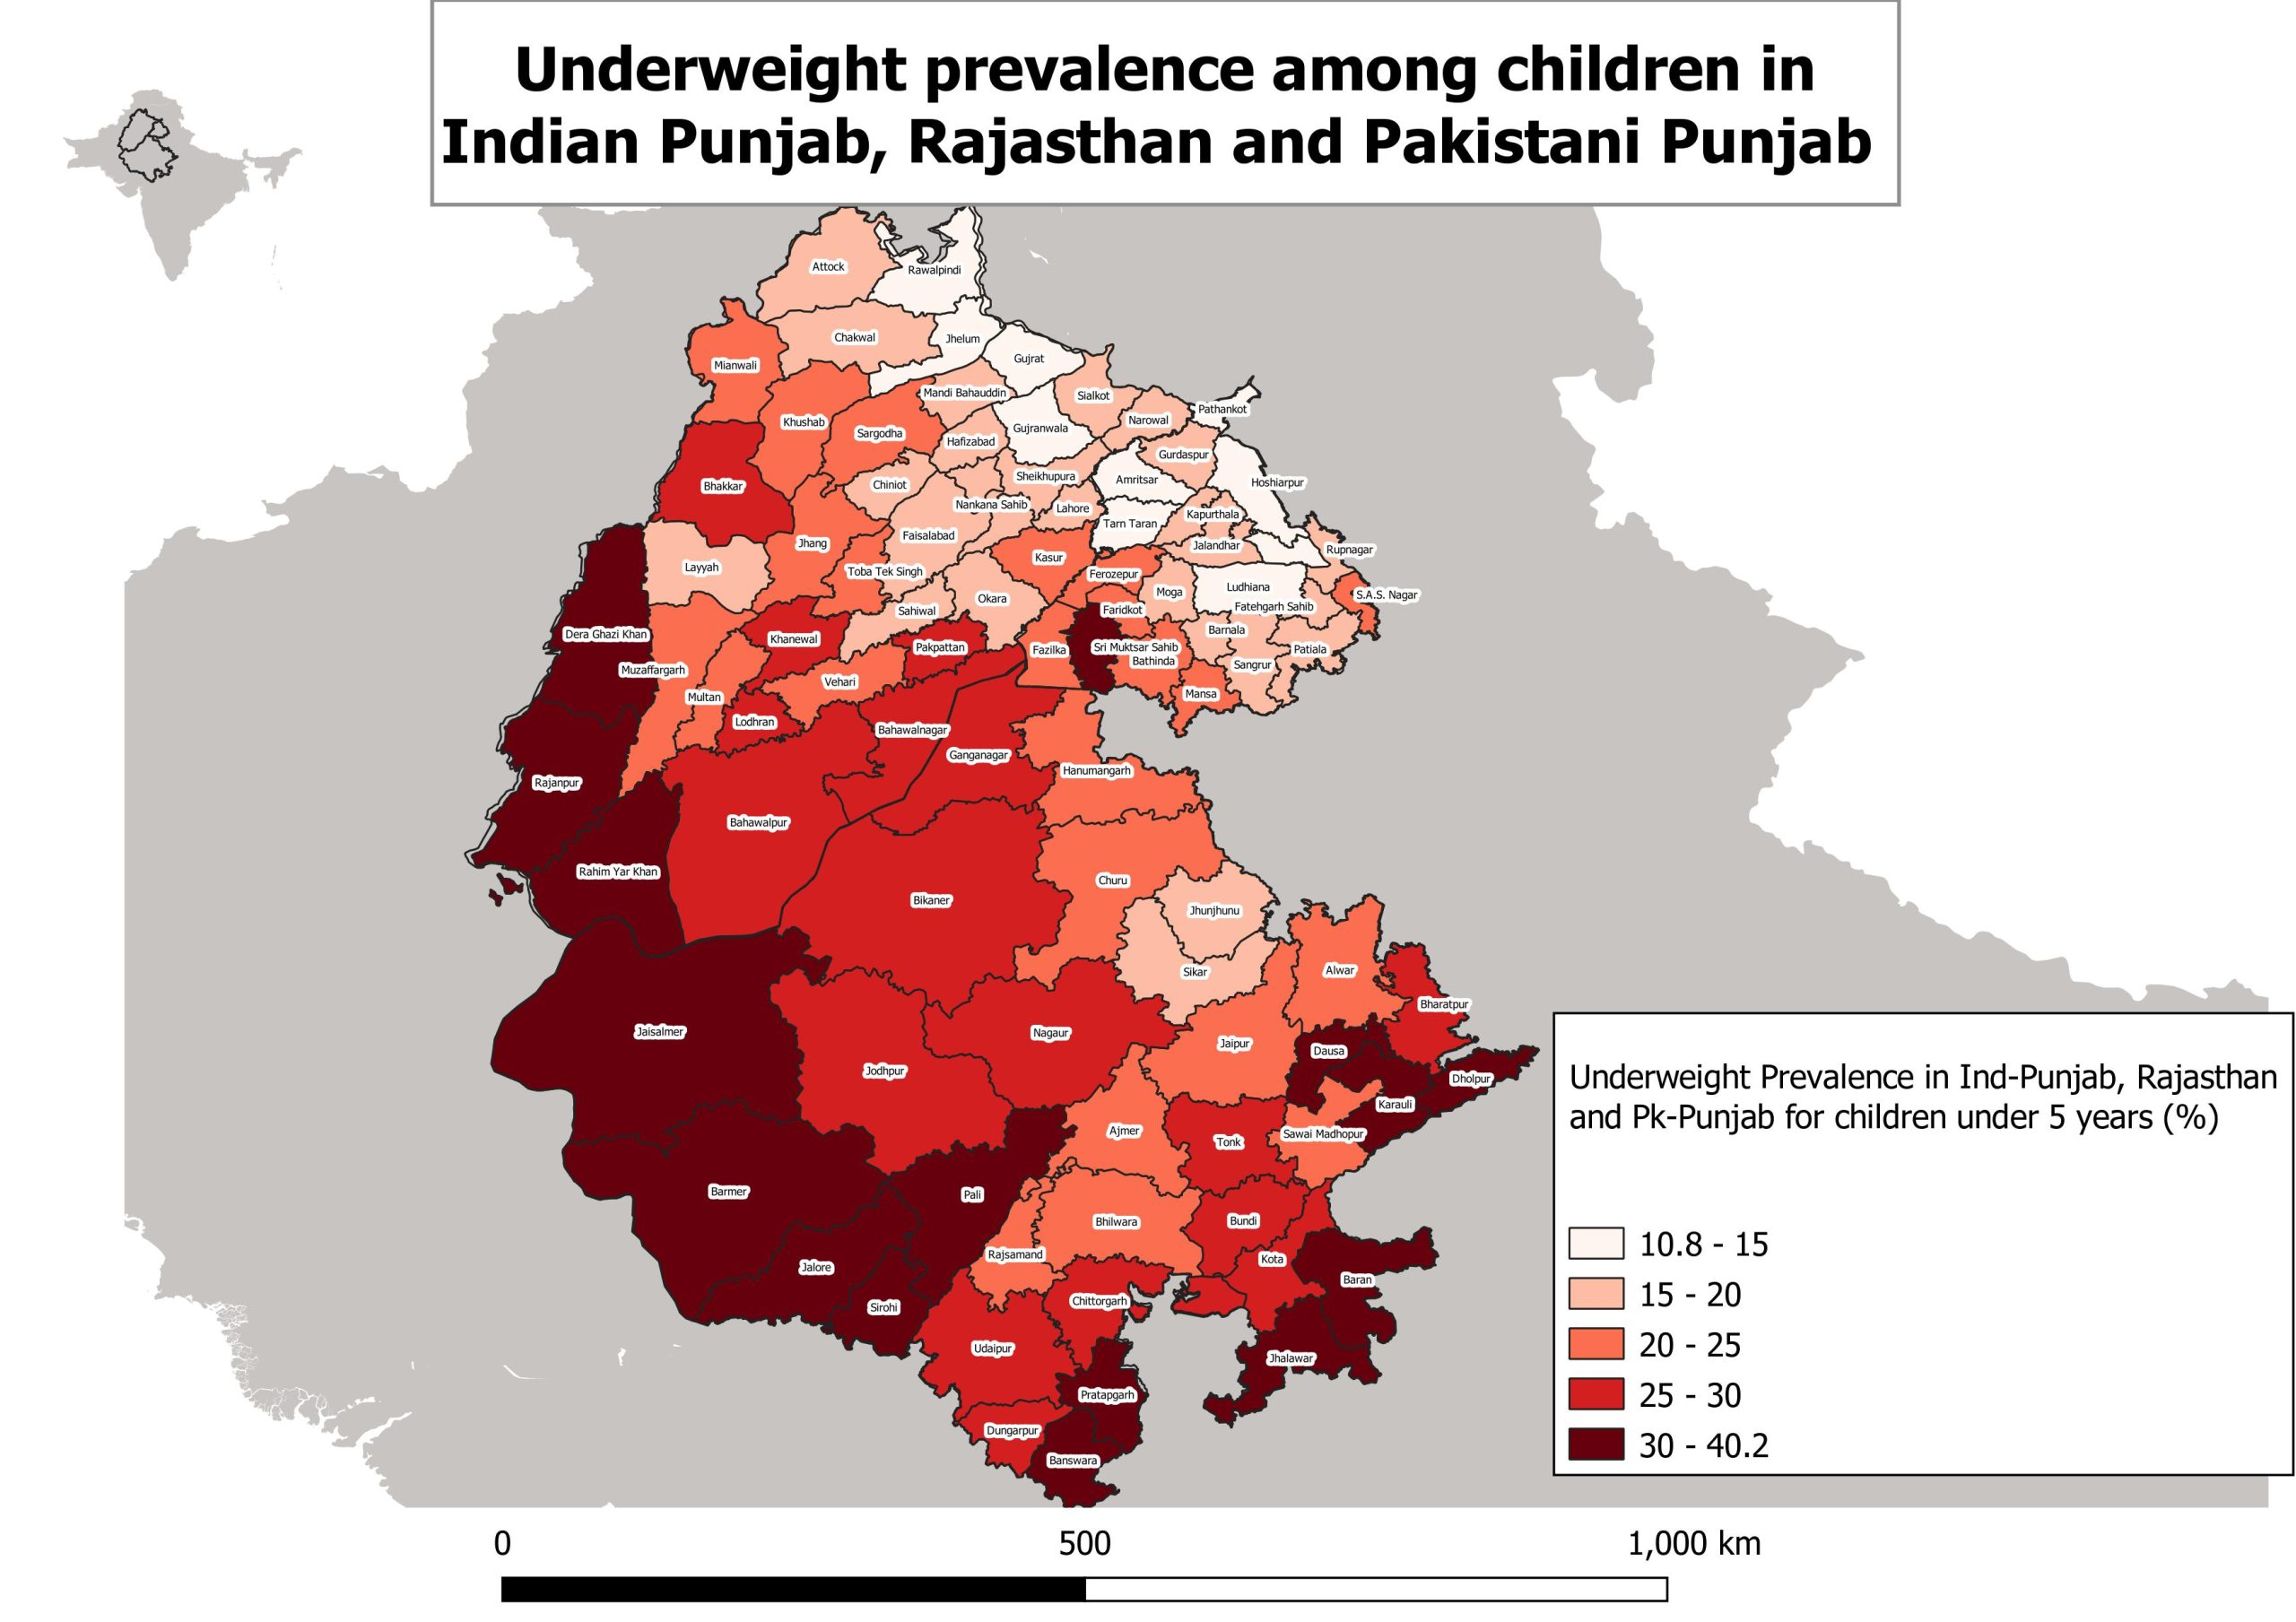 Map showing the prevalence of underweight among children in Indian Punjab, Rajasthan, and Pakistani Punjab